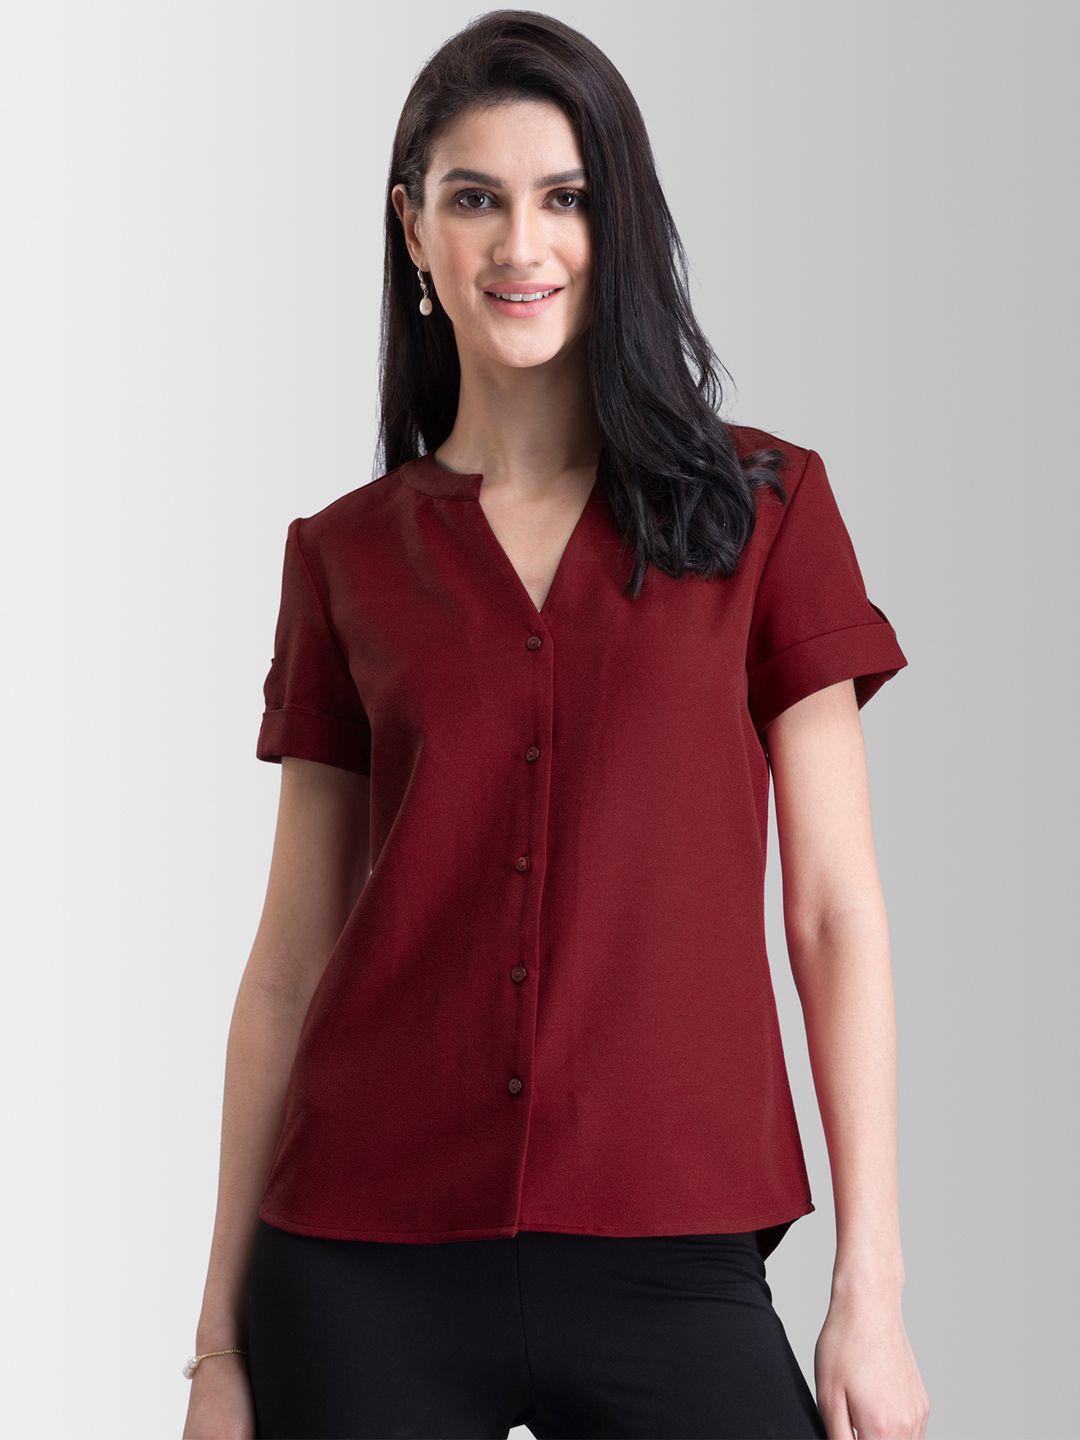 fablestreet women red solid top